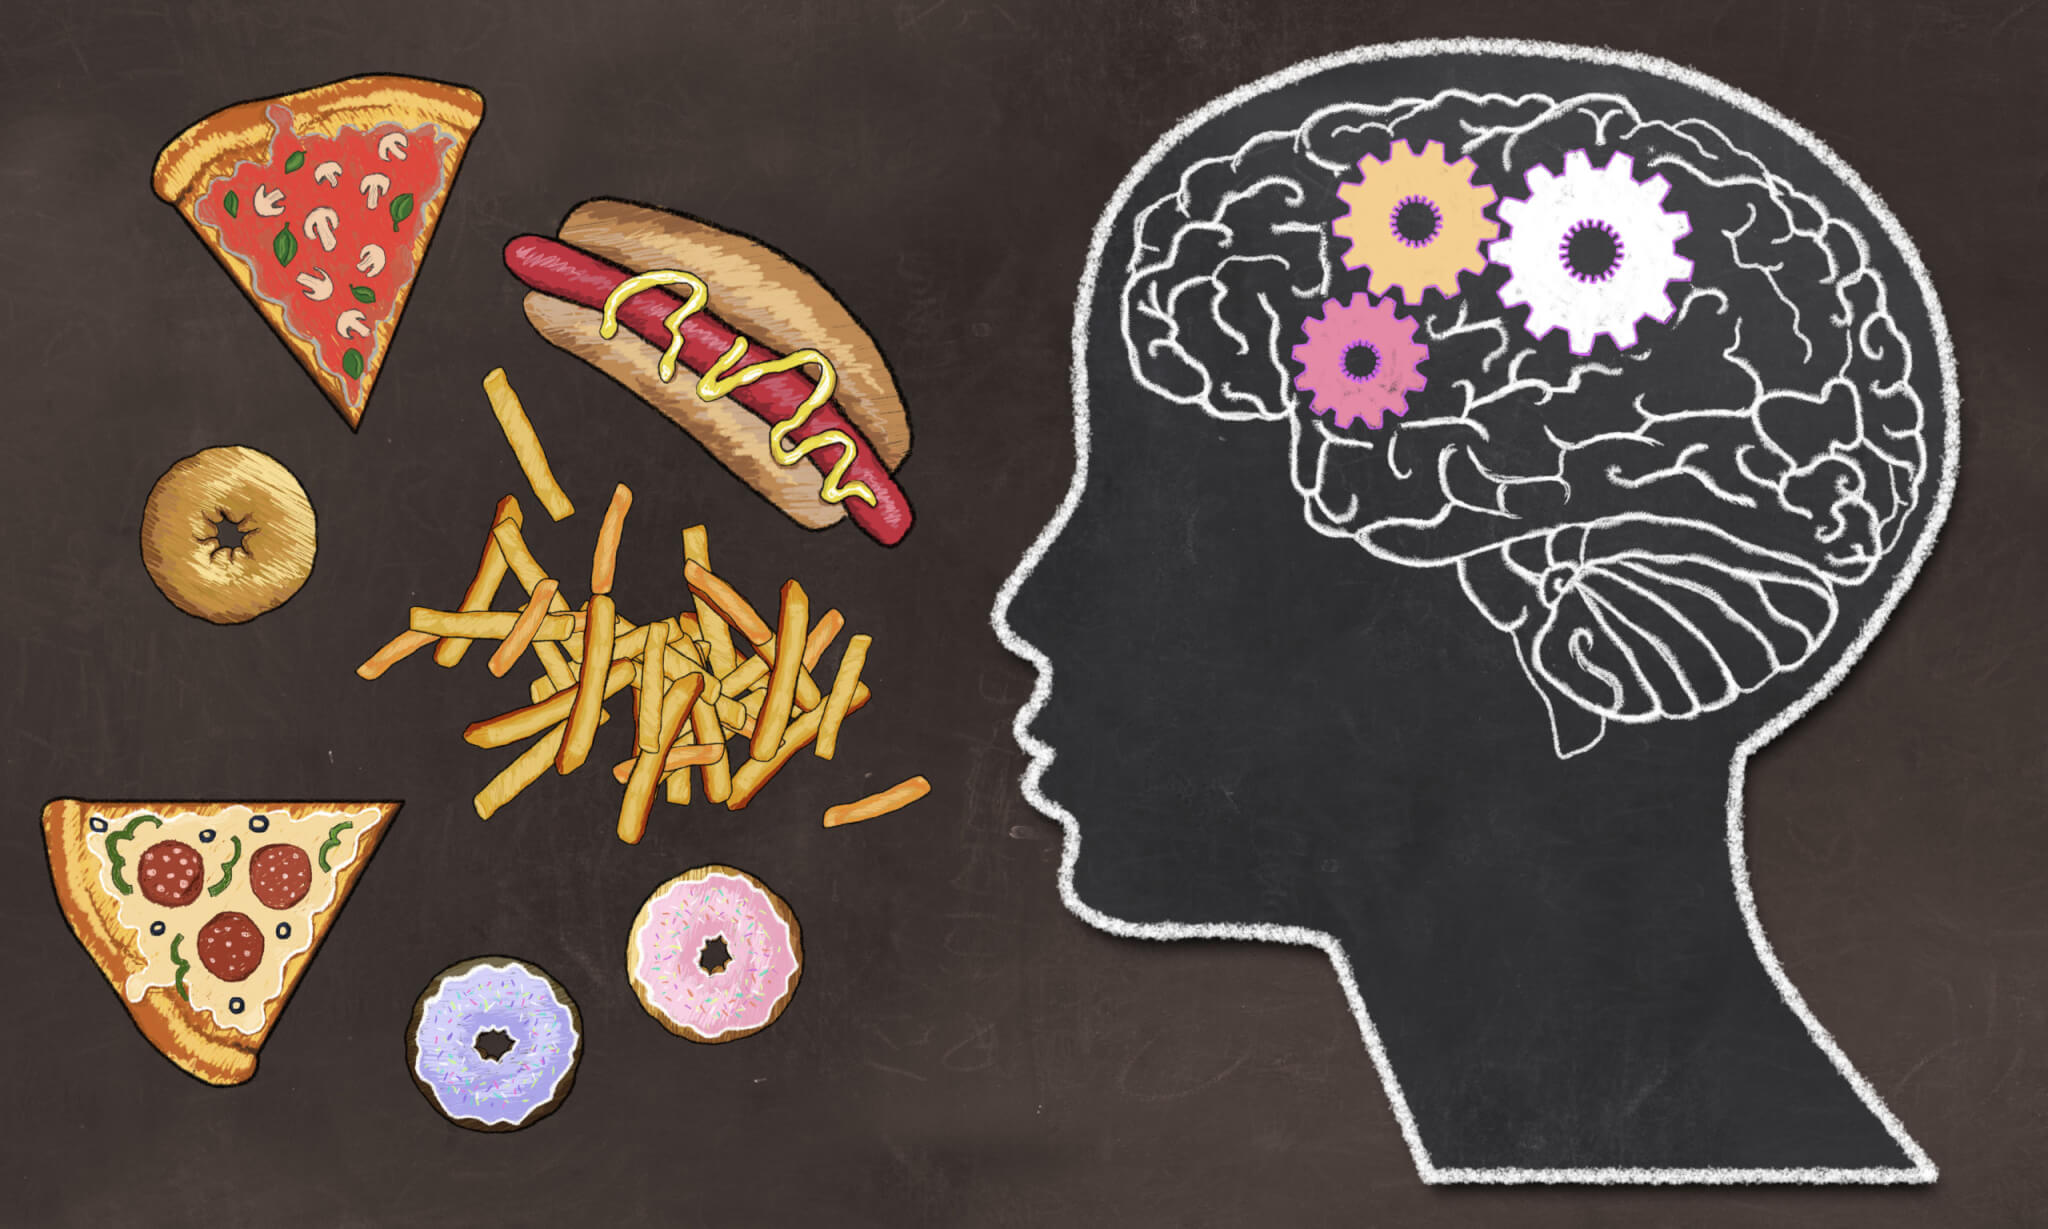 Junk food's evil ways: High-fat diet hijacks the brain's ability to regulate appetite